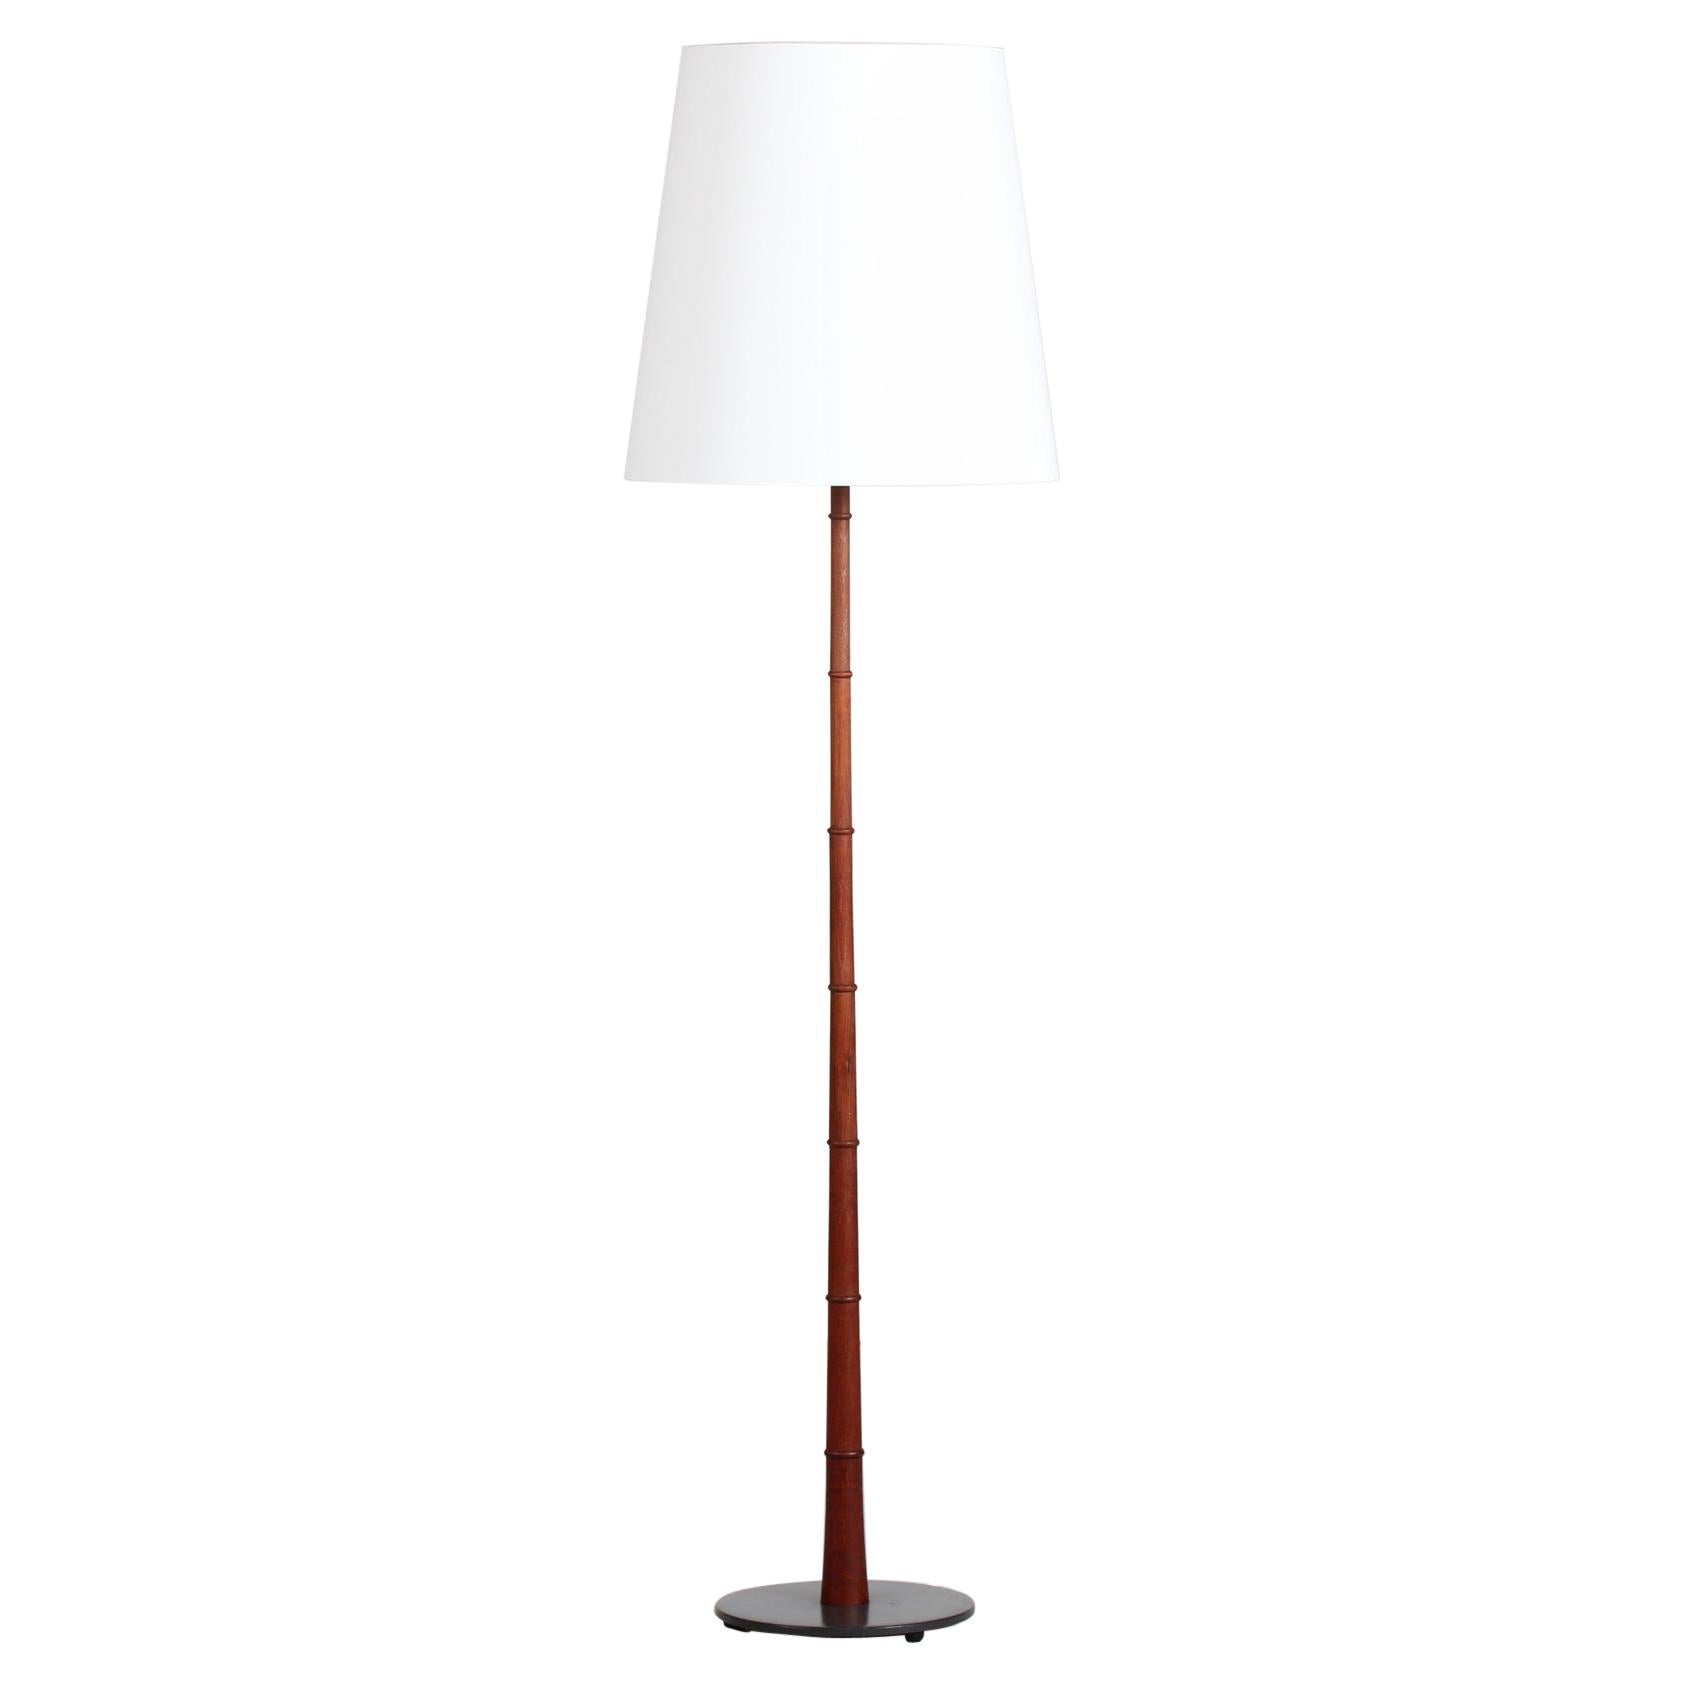 Danish Modern 1960s Floor Lamp of Teak with Black Metal Foot and New Shade For Sale